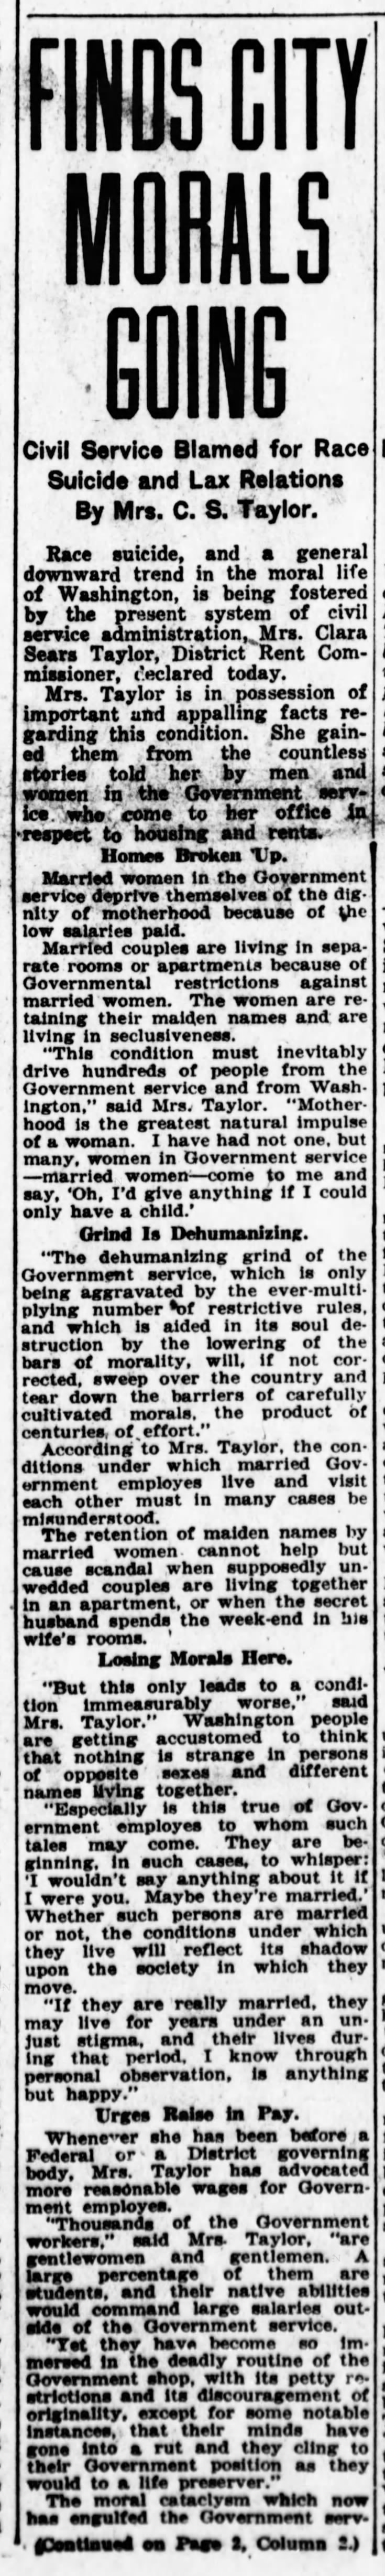 Clara Sears Taylor on morality among federal workers (1922)